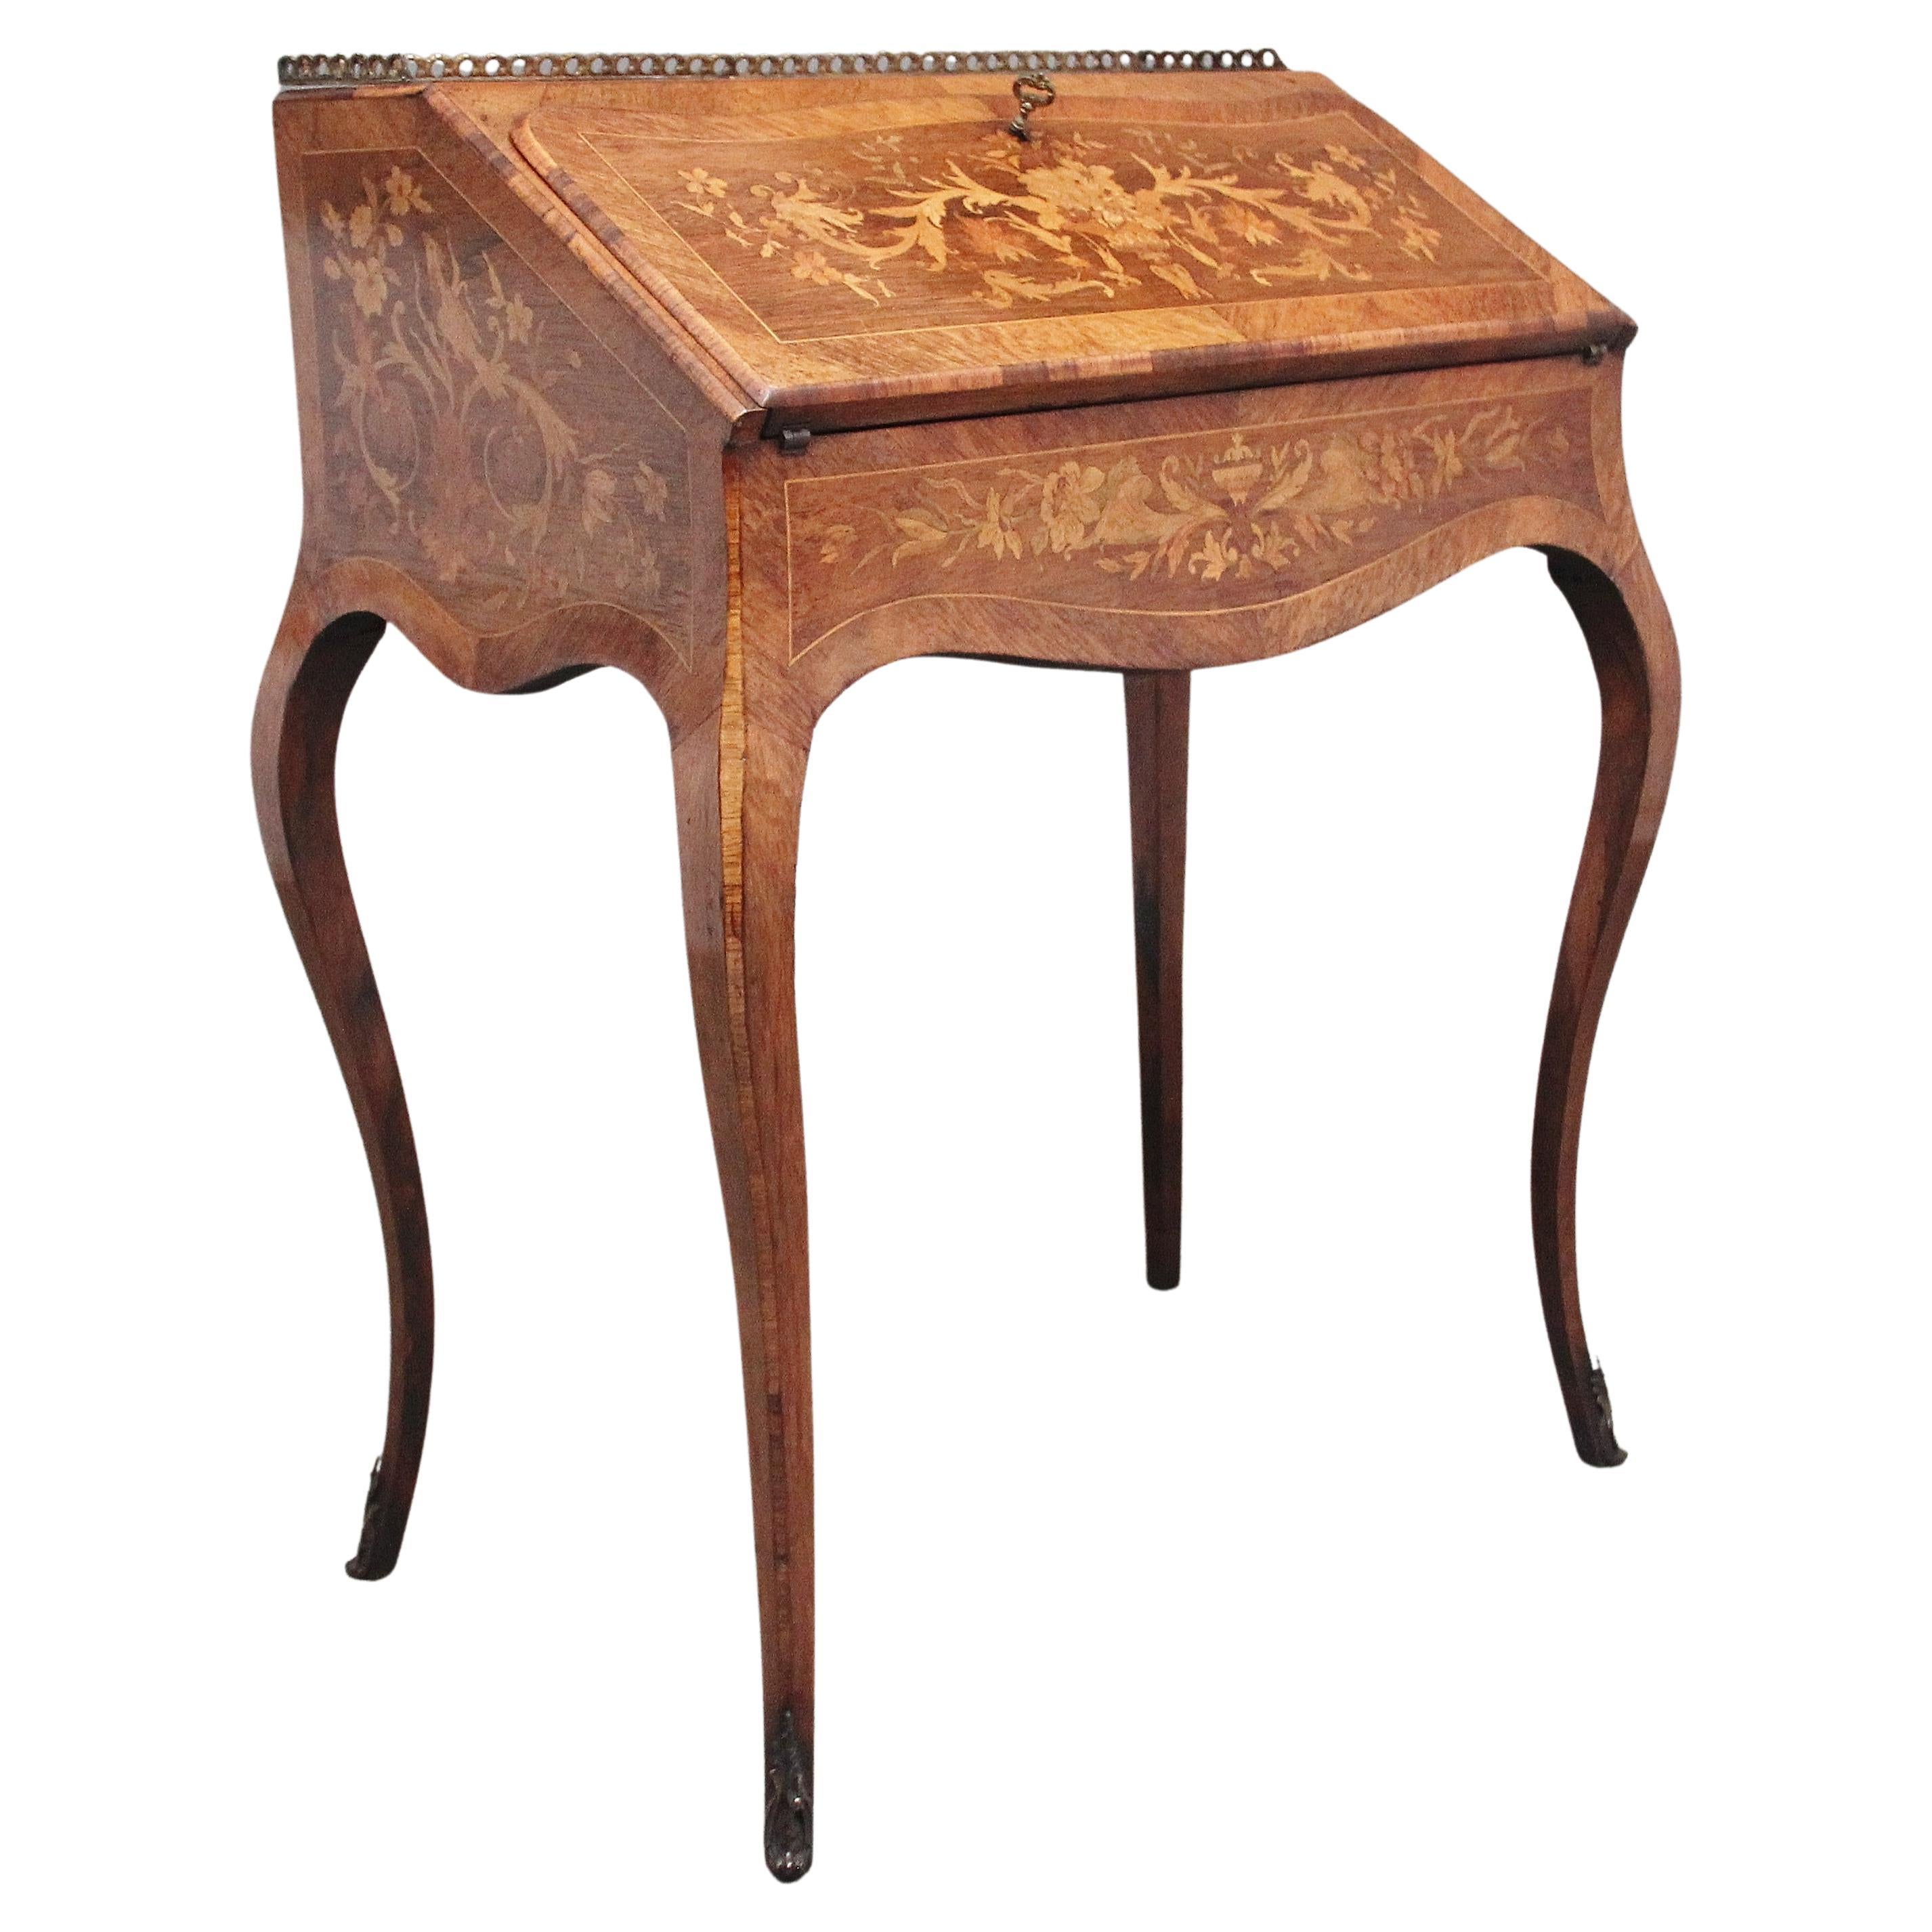 Superb Quality Freestanding 19th Century Kingwood and Marquetry Inlaid Bureau For Sale